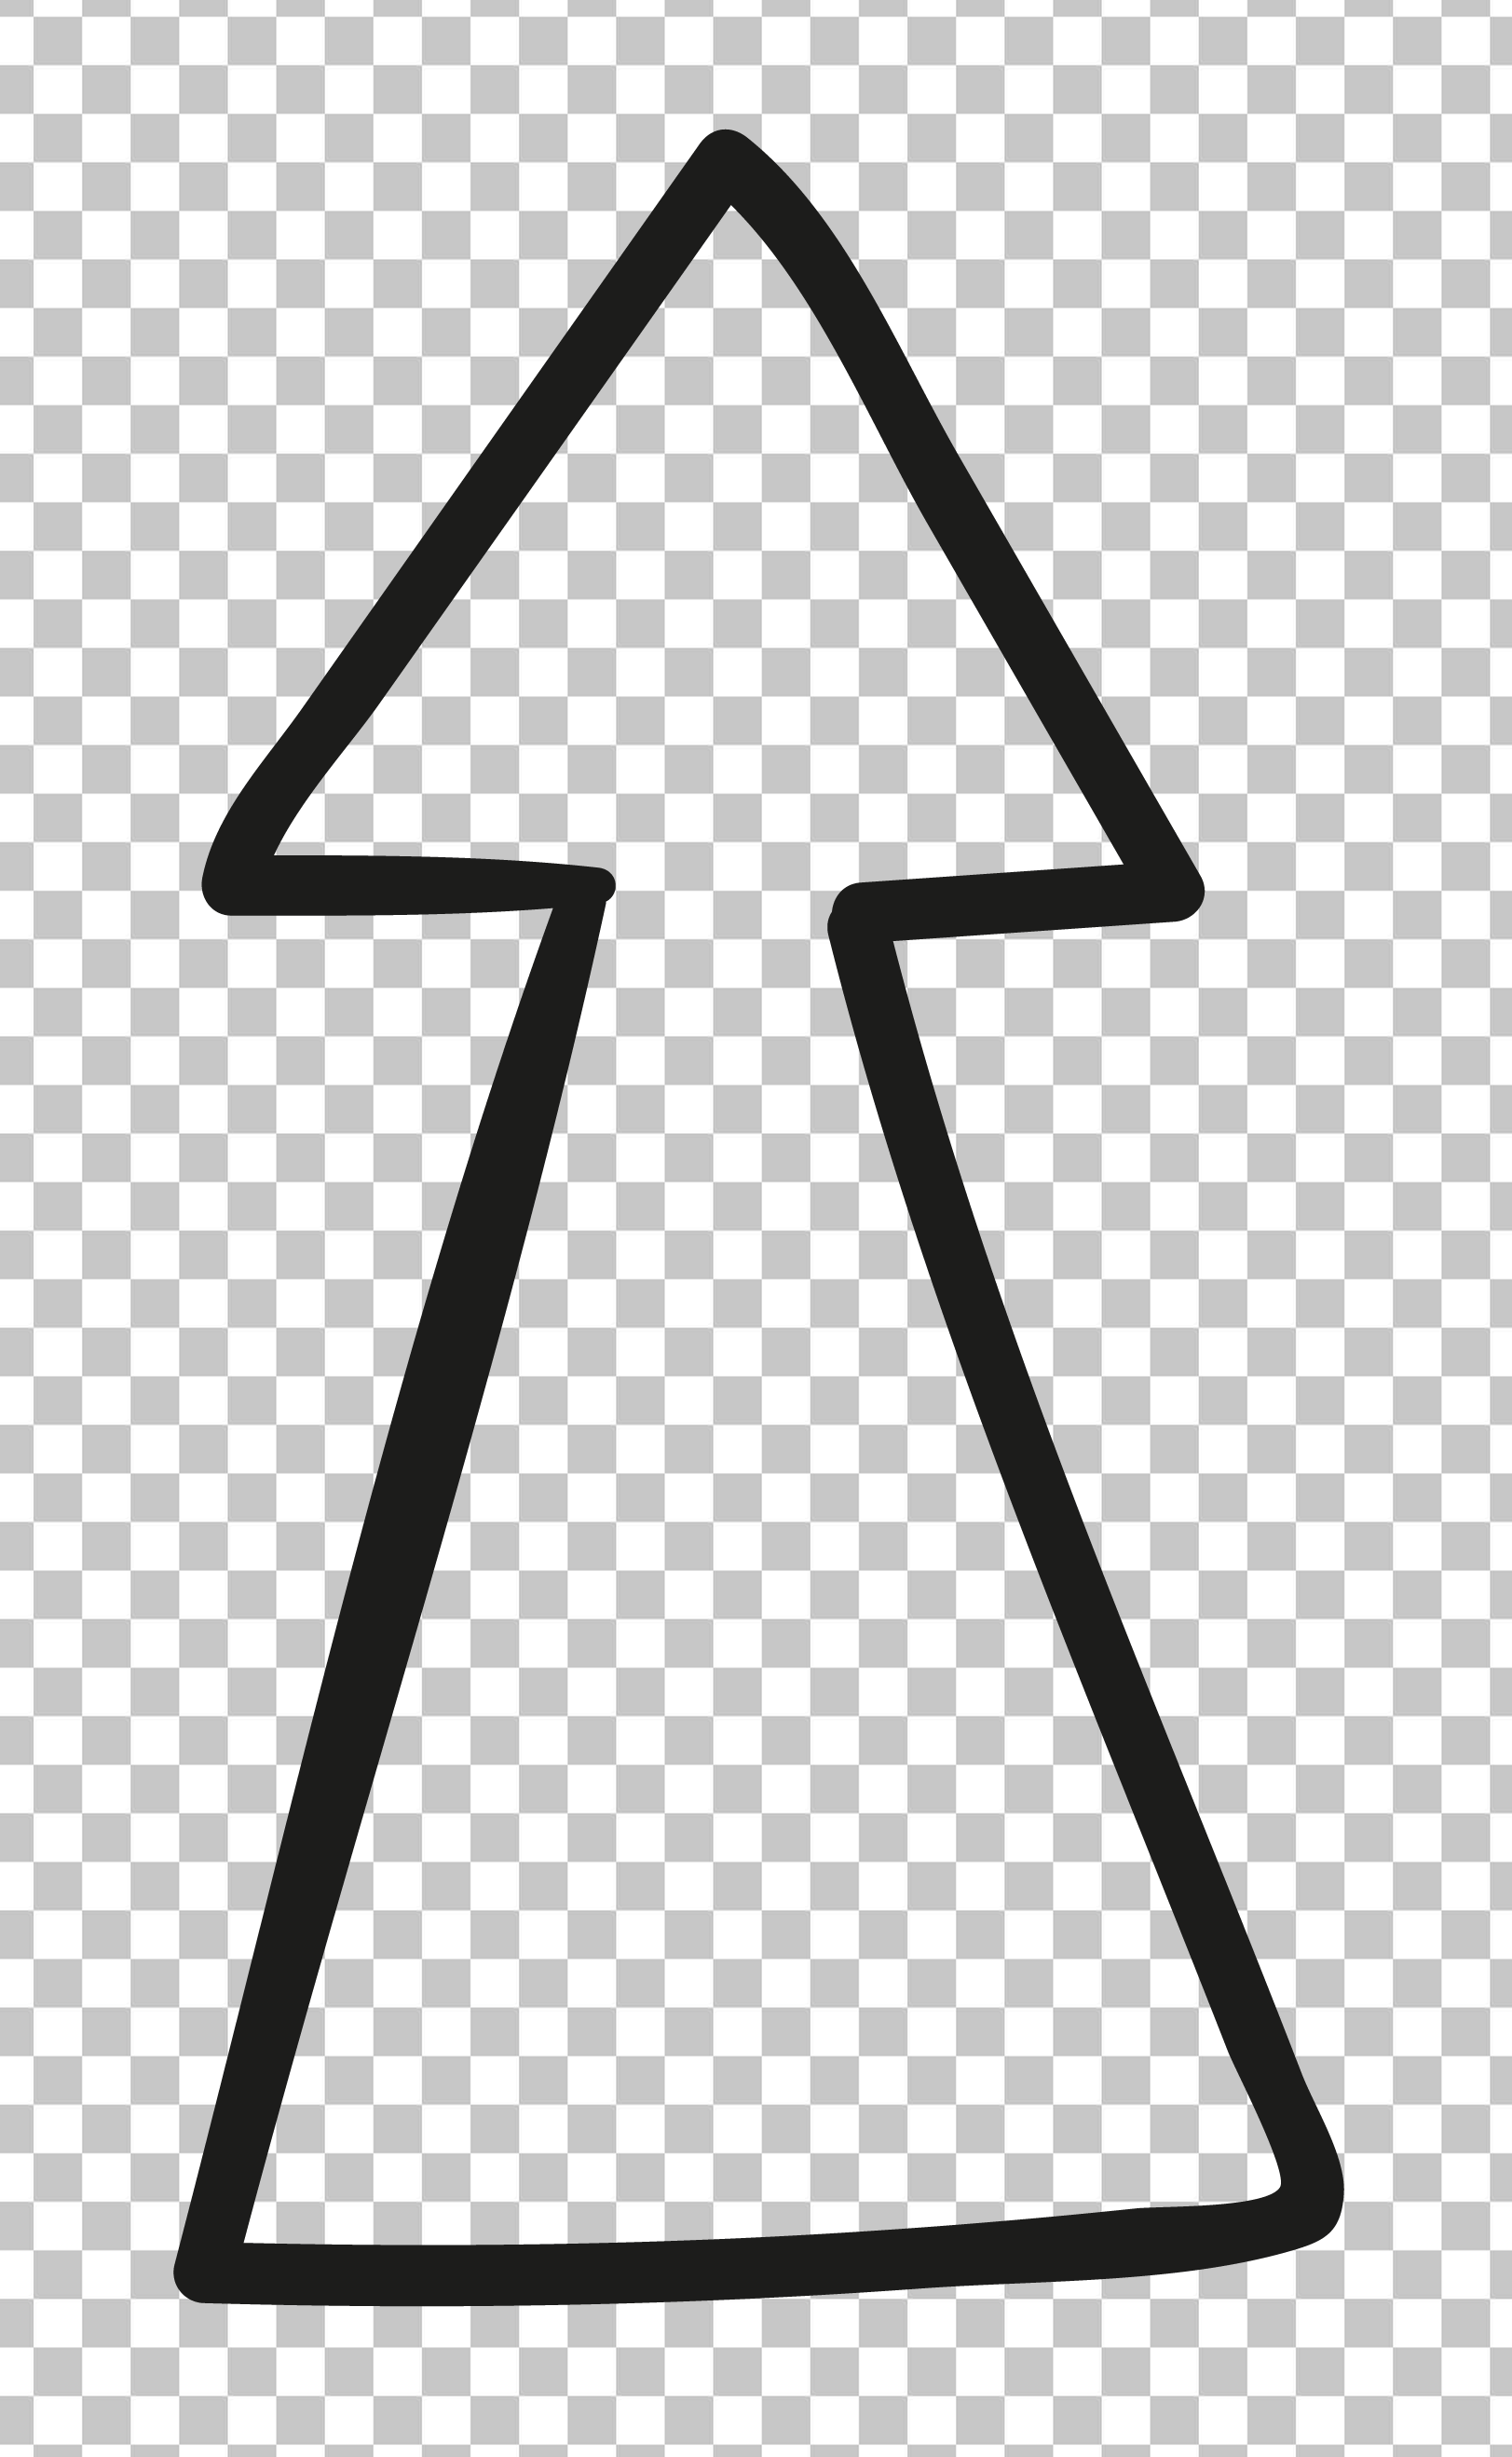 Black and White Arrow Pointing Up PNG Image